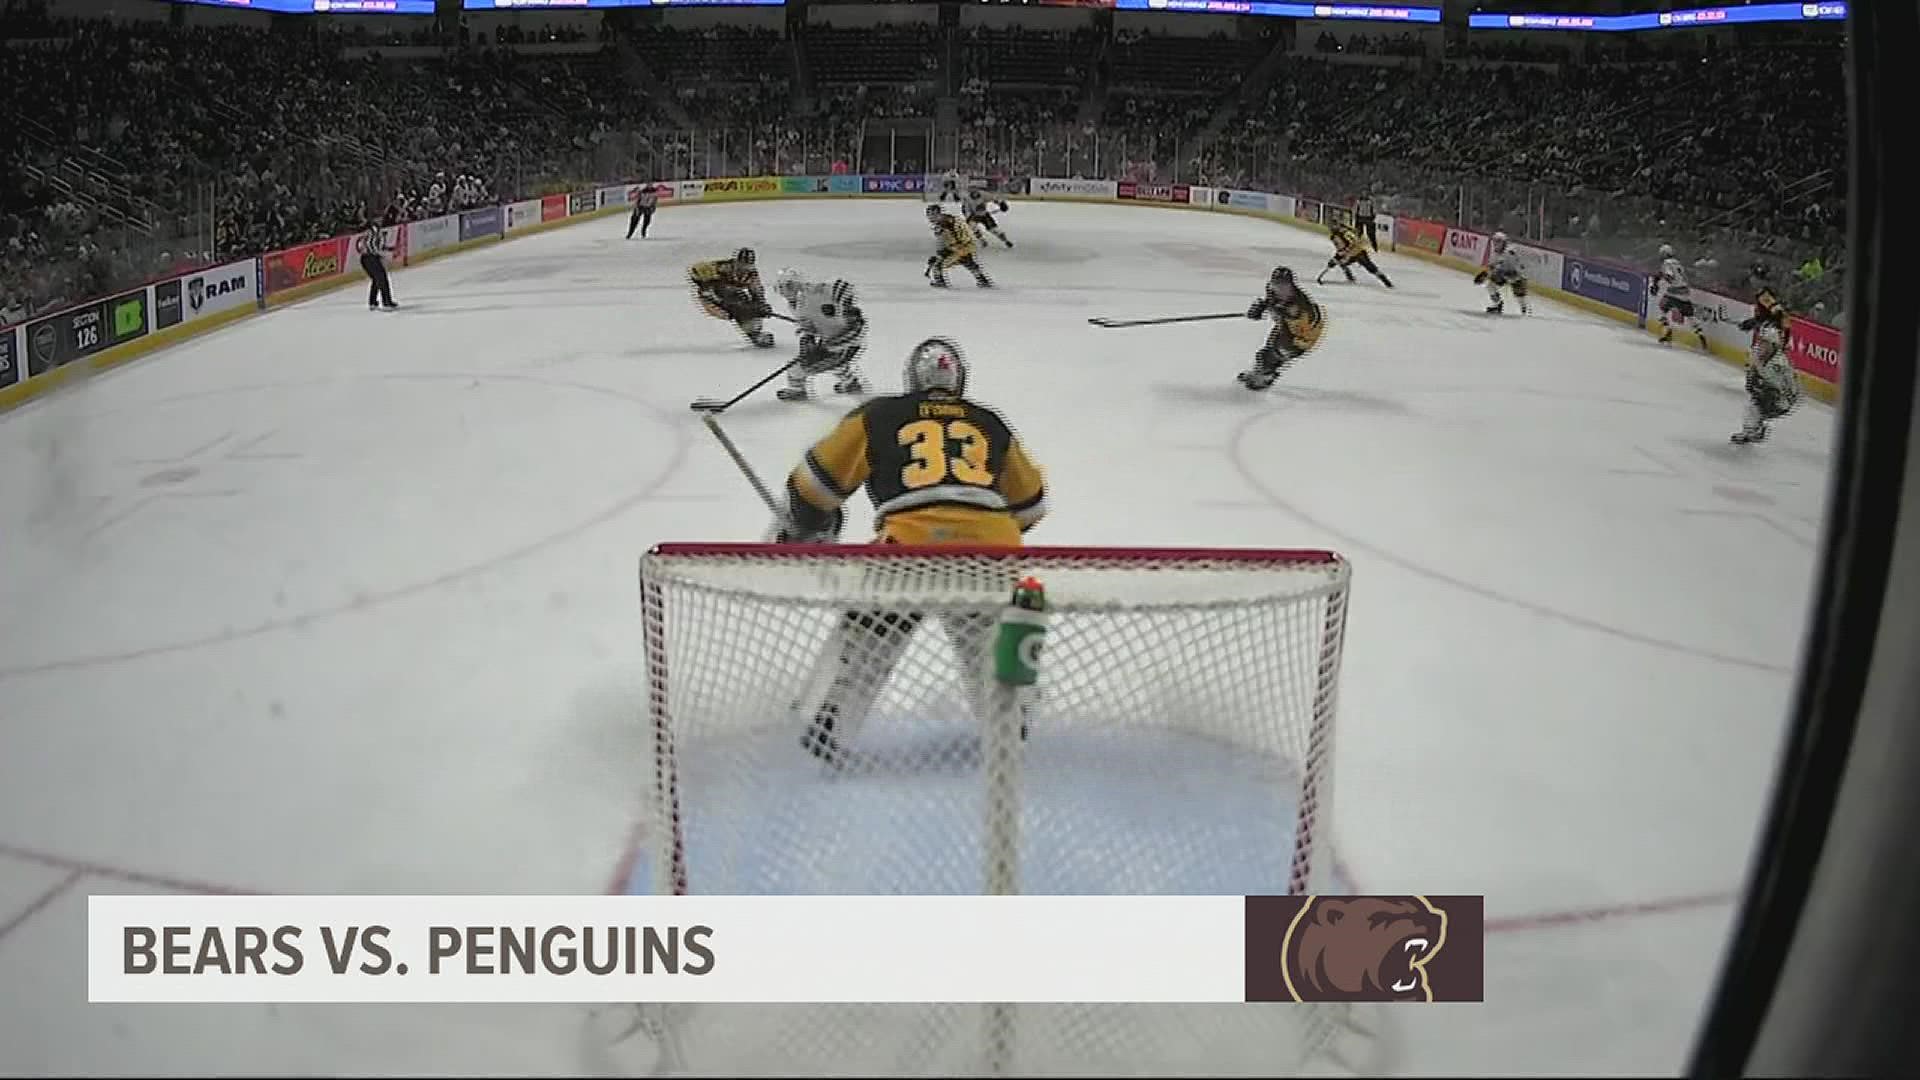 Bears down Penguins in a 3 to 8 win